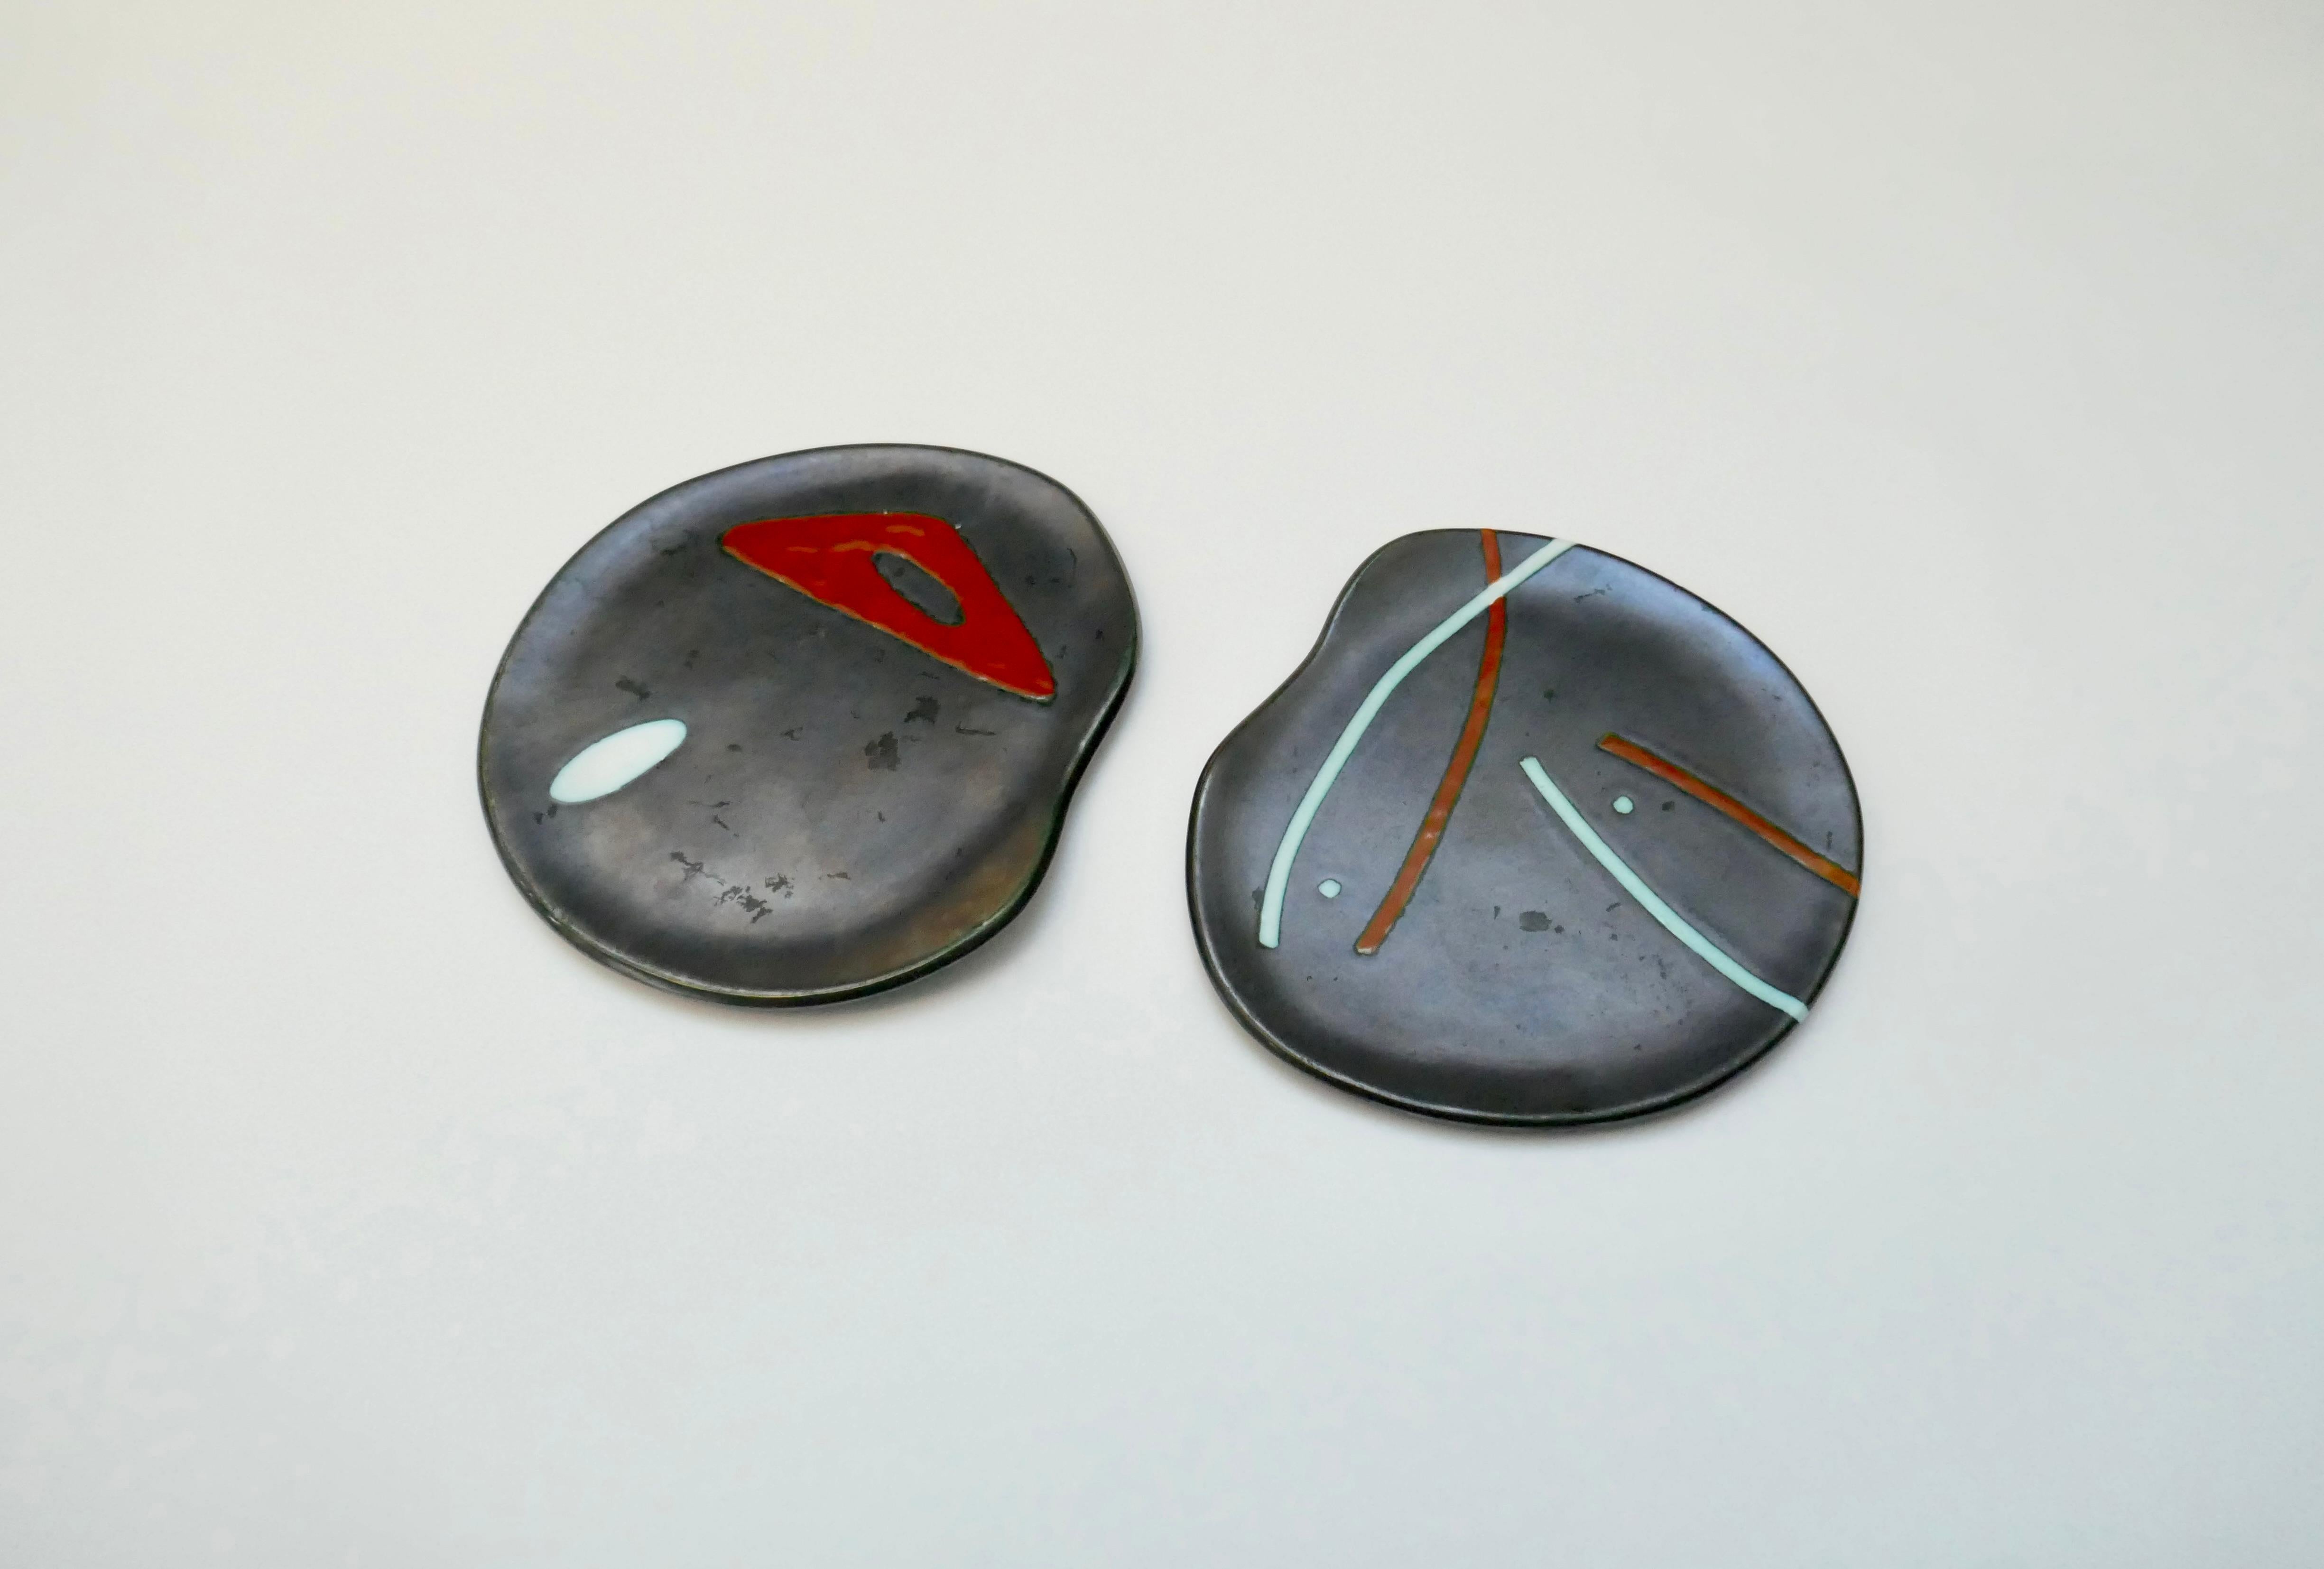 Mid-Century Modern Free Form Black Ceramic Dishes/Plaques by Peter Orlando, France, 1960s For Sale